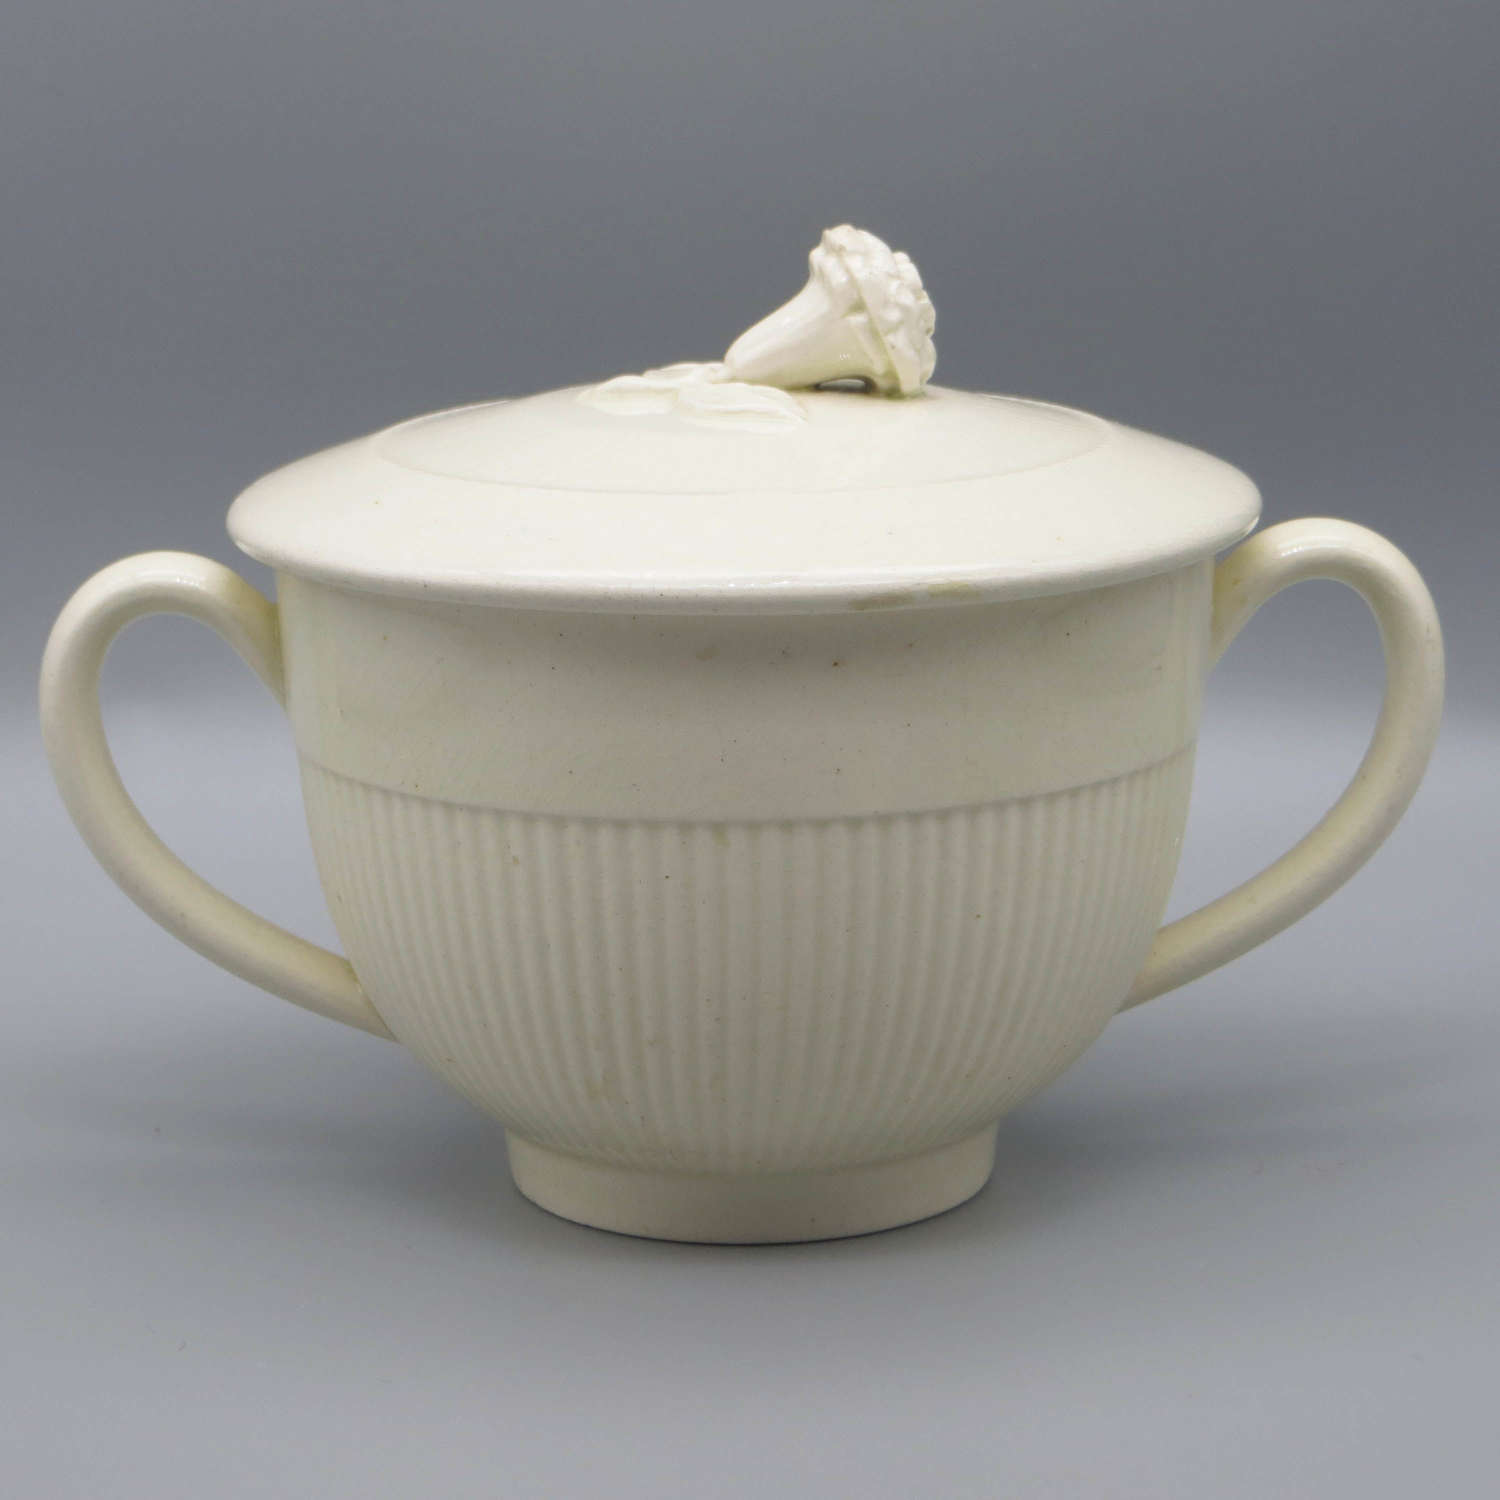 Creamware bowl and cover